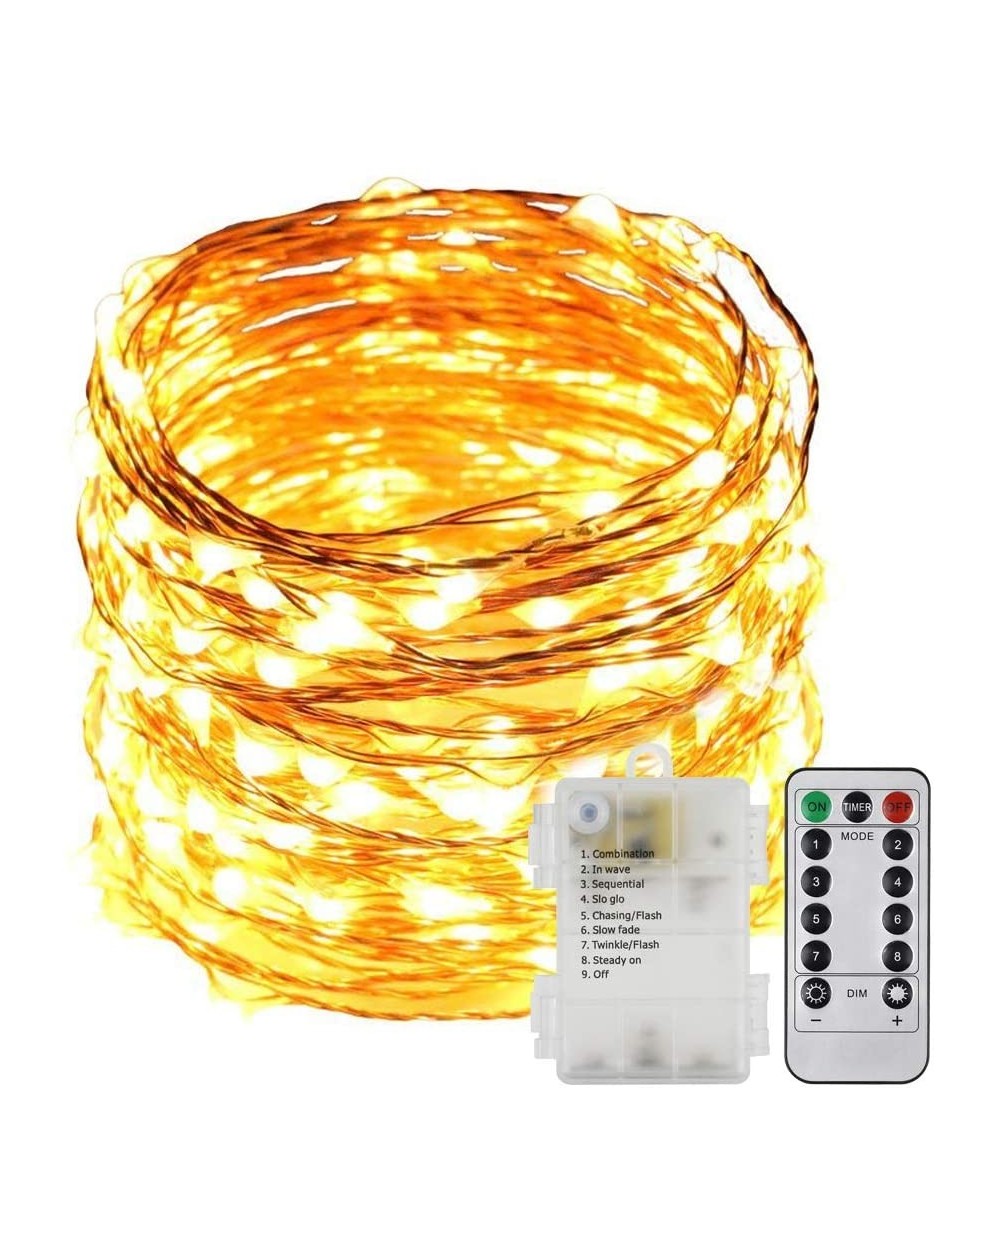 Outdoor String Lights New Version 240LED 40Feet Indoor and Outdoor Waterproof 8 Lighting Model Battery Operated 240 LED Strin...